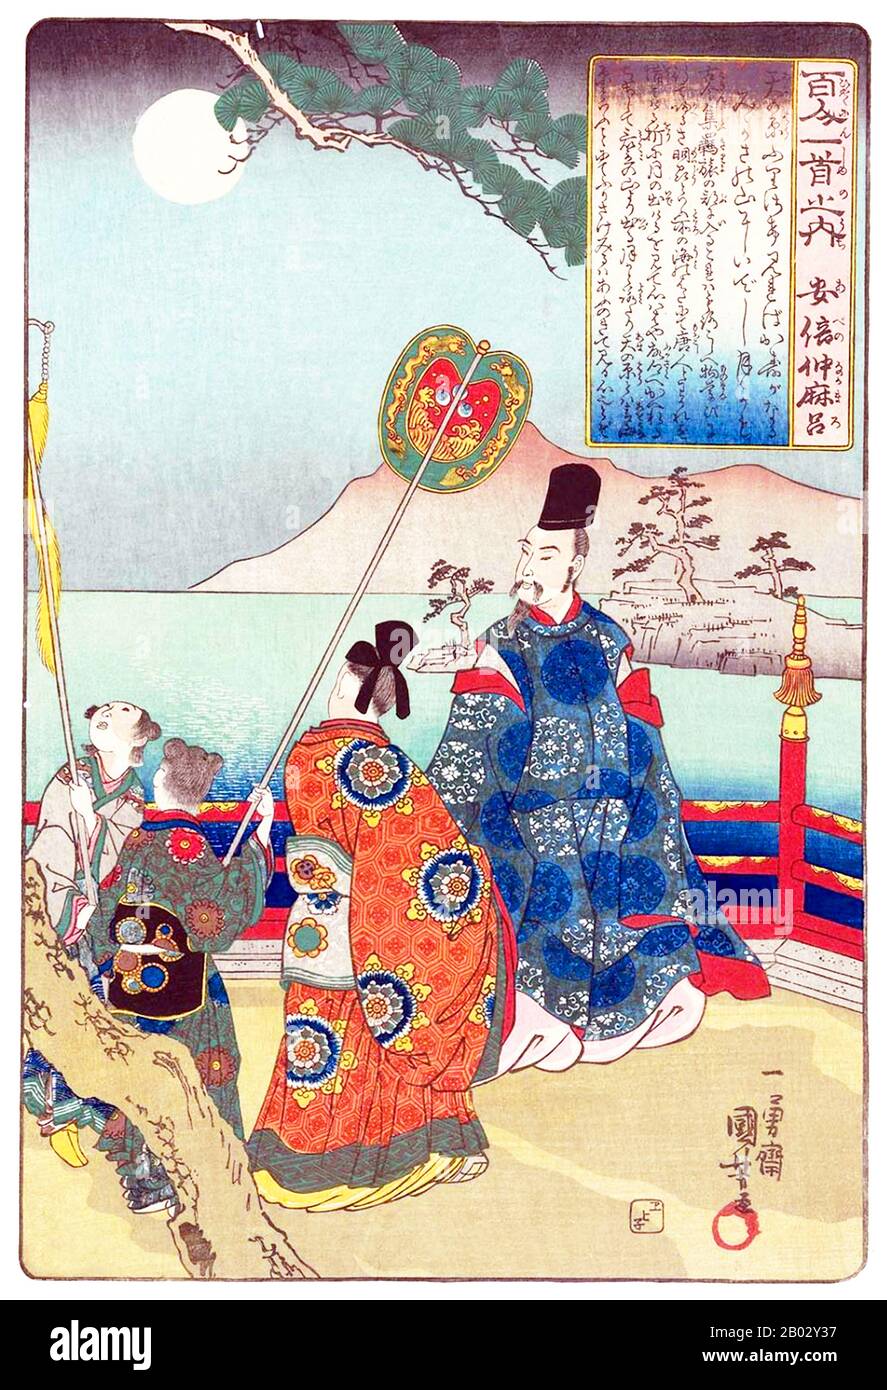 In 717-718, Abe no Nakamoro was part of the Japanese mission to Tang China (Kentoshi) along with Kibi no Makibi and Genbo. They returned to Japan; he did not.  In China, he passed the civil-service examination. Around 725, he took an administrative position and was promoted in Luoyang in 728 and 731. Around 733 he received Tajihi Hironari, who would command the Japanese diplomatic mission. In 734 he tried to return to Japan but the ship to take him back sank not long into the journey, forcing him to remain in China for several more years. In 752, he tried again to return, with the mission to C Stock Photo